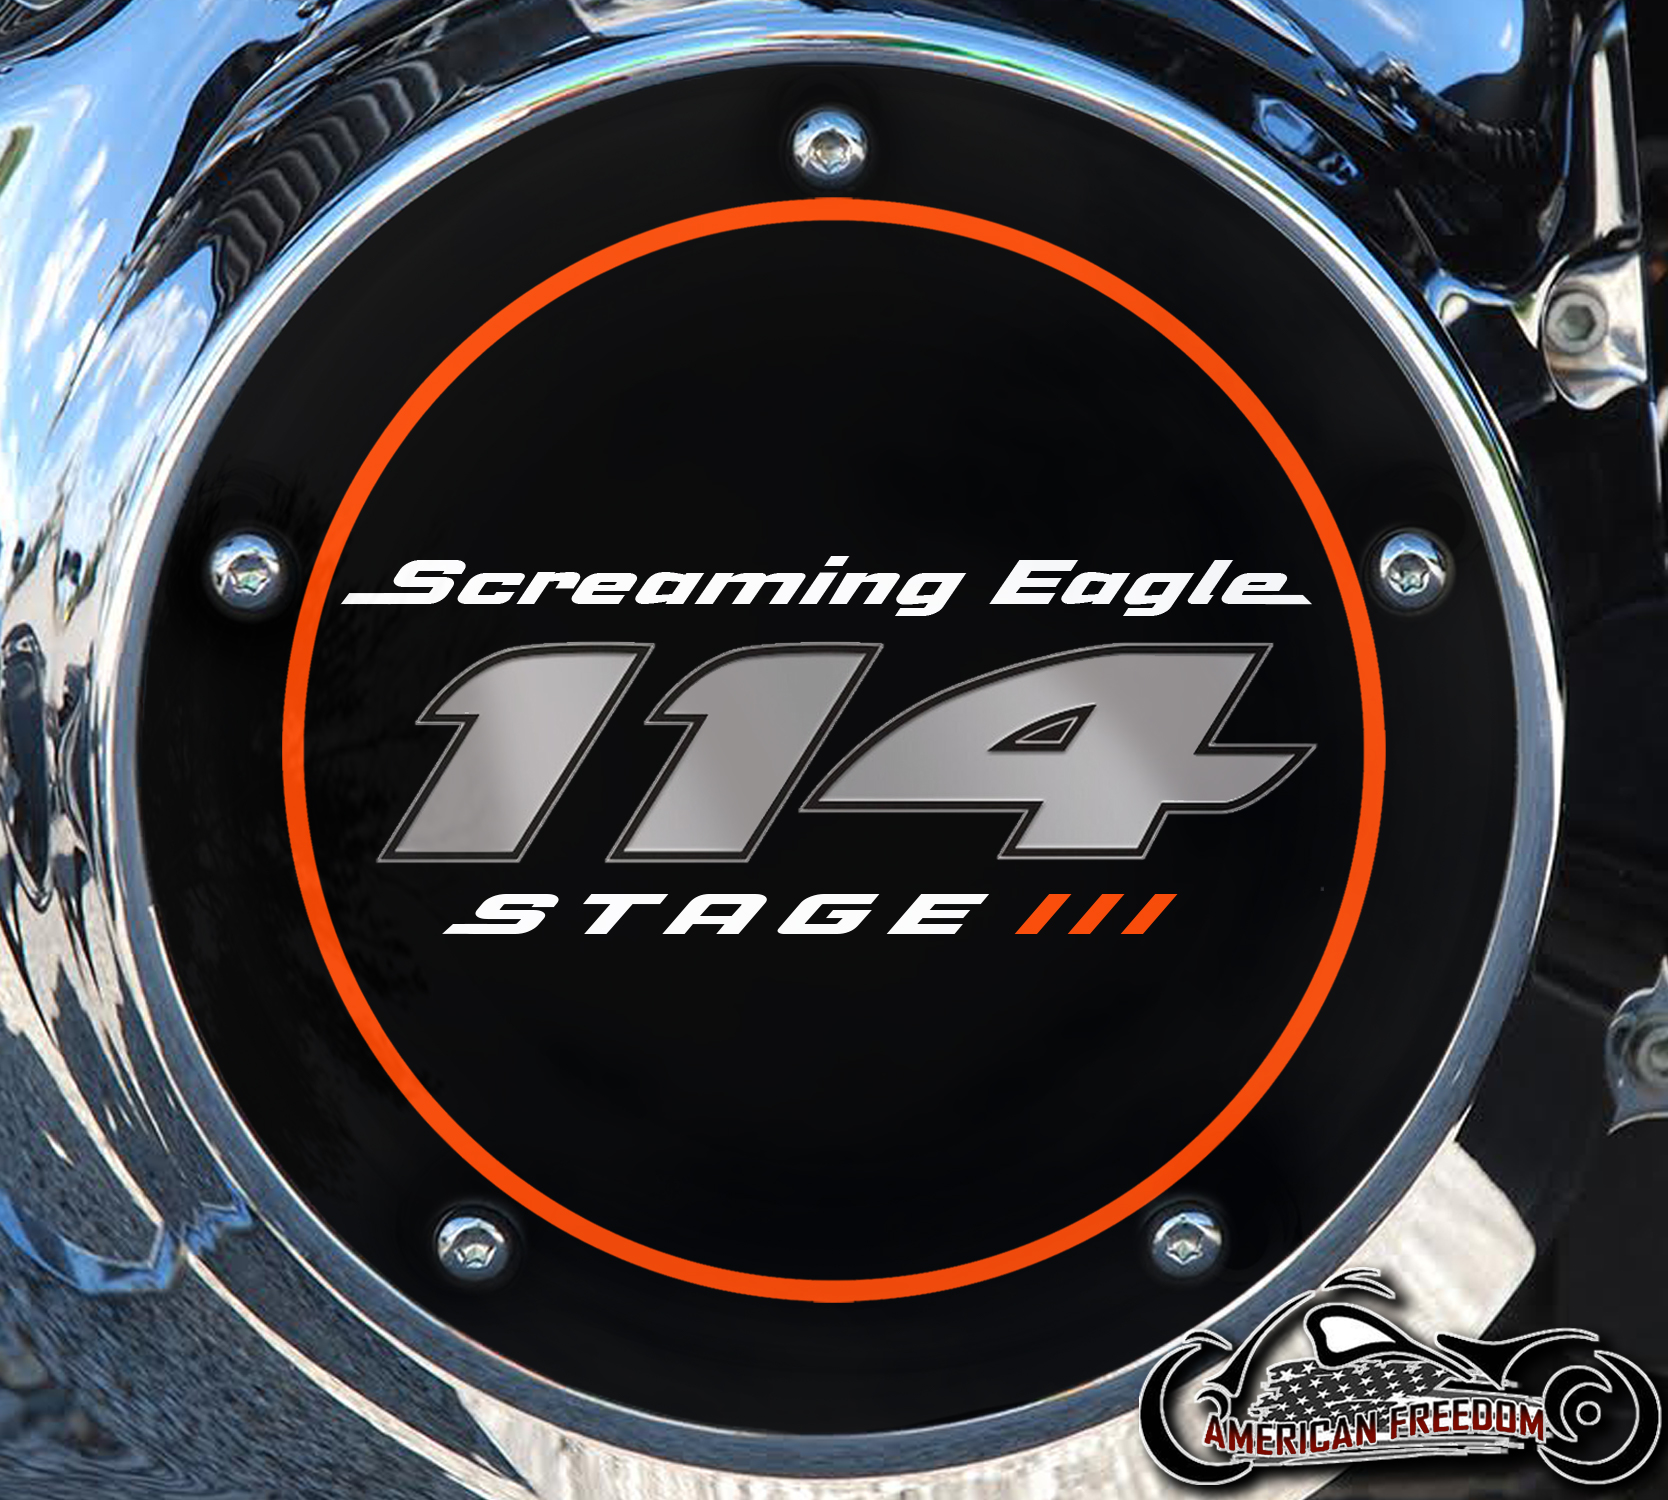 Screaming Eagle Stage III 114 DERBY COVER ORANGE